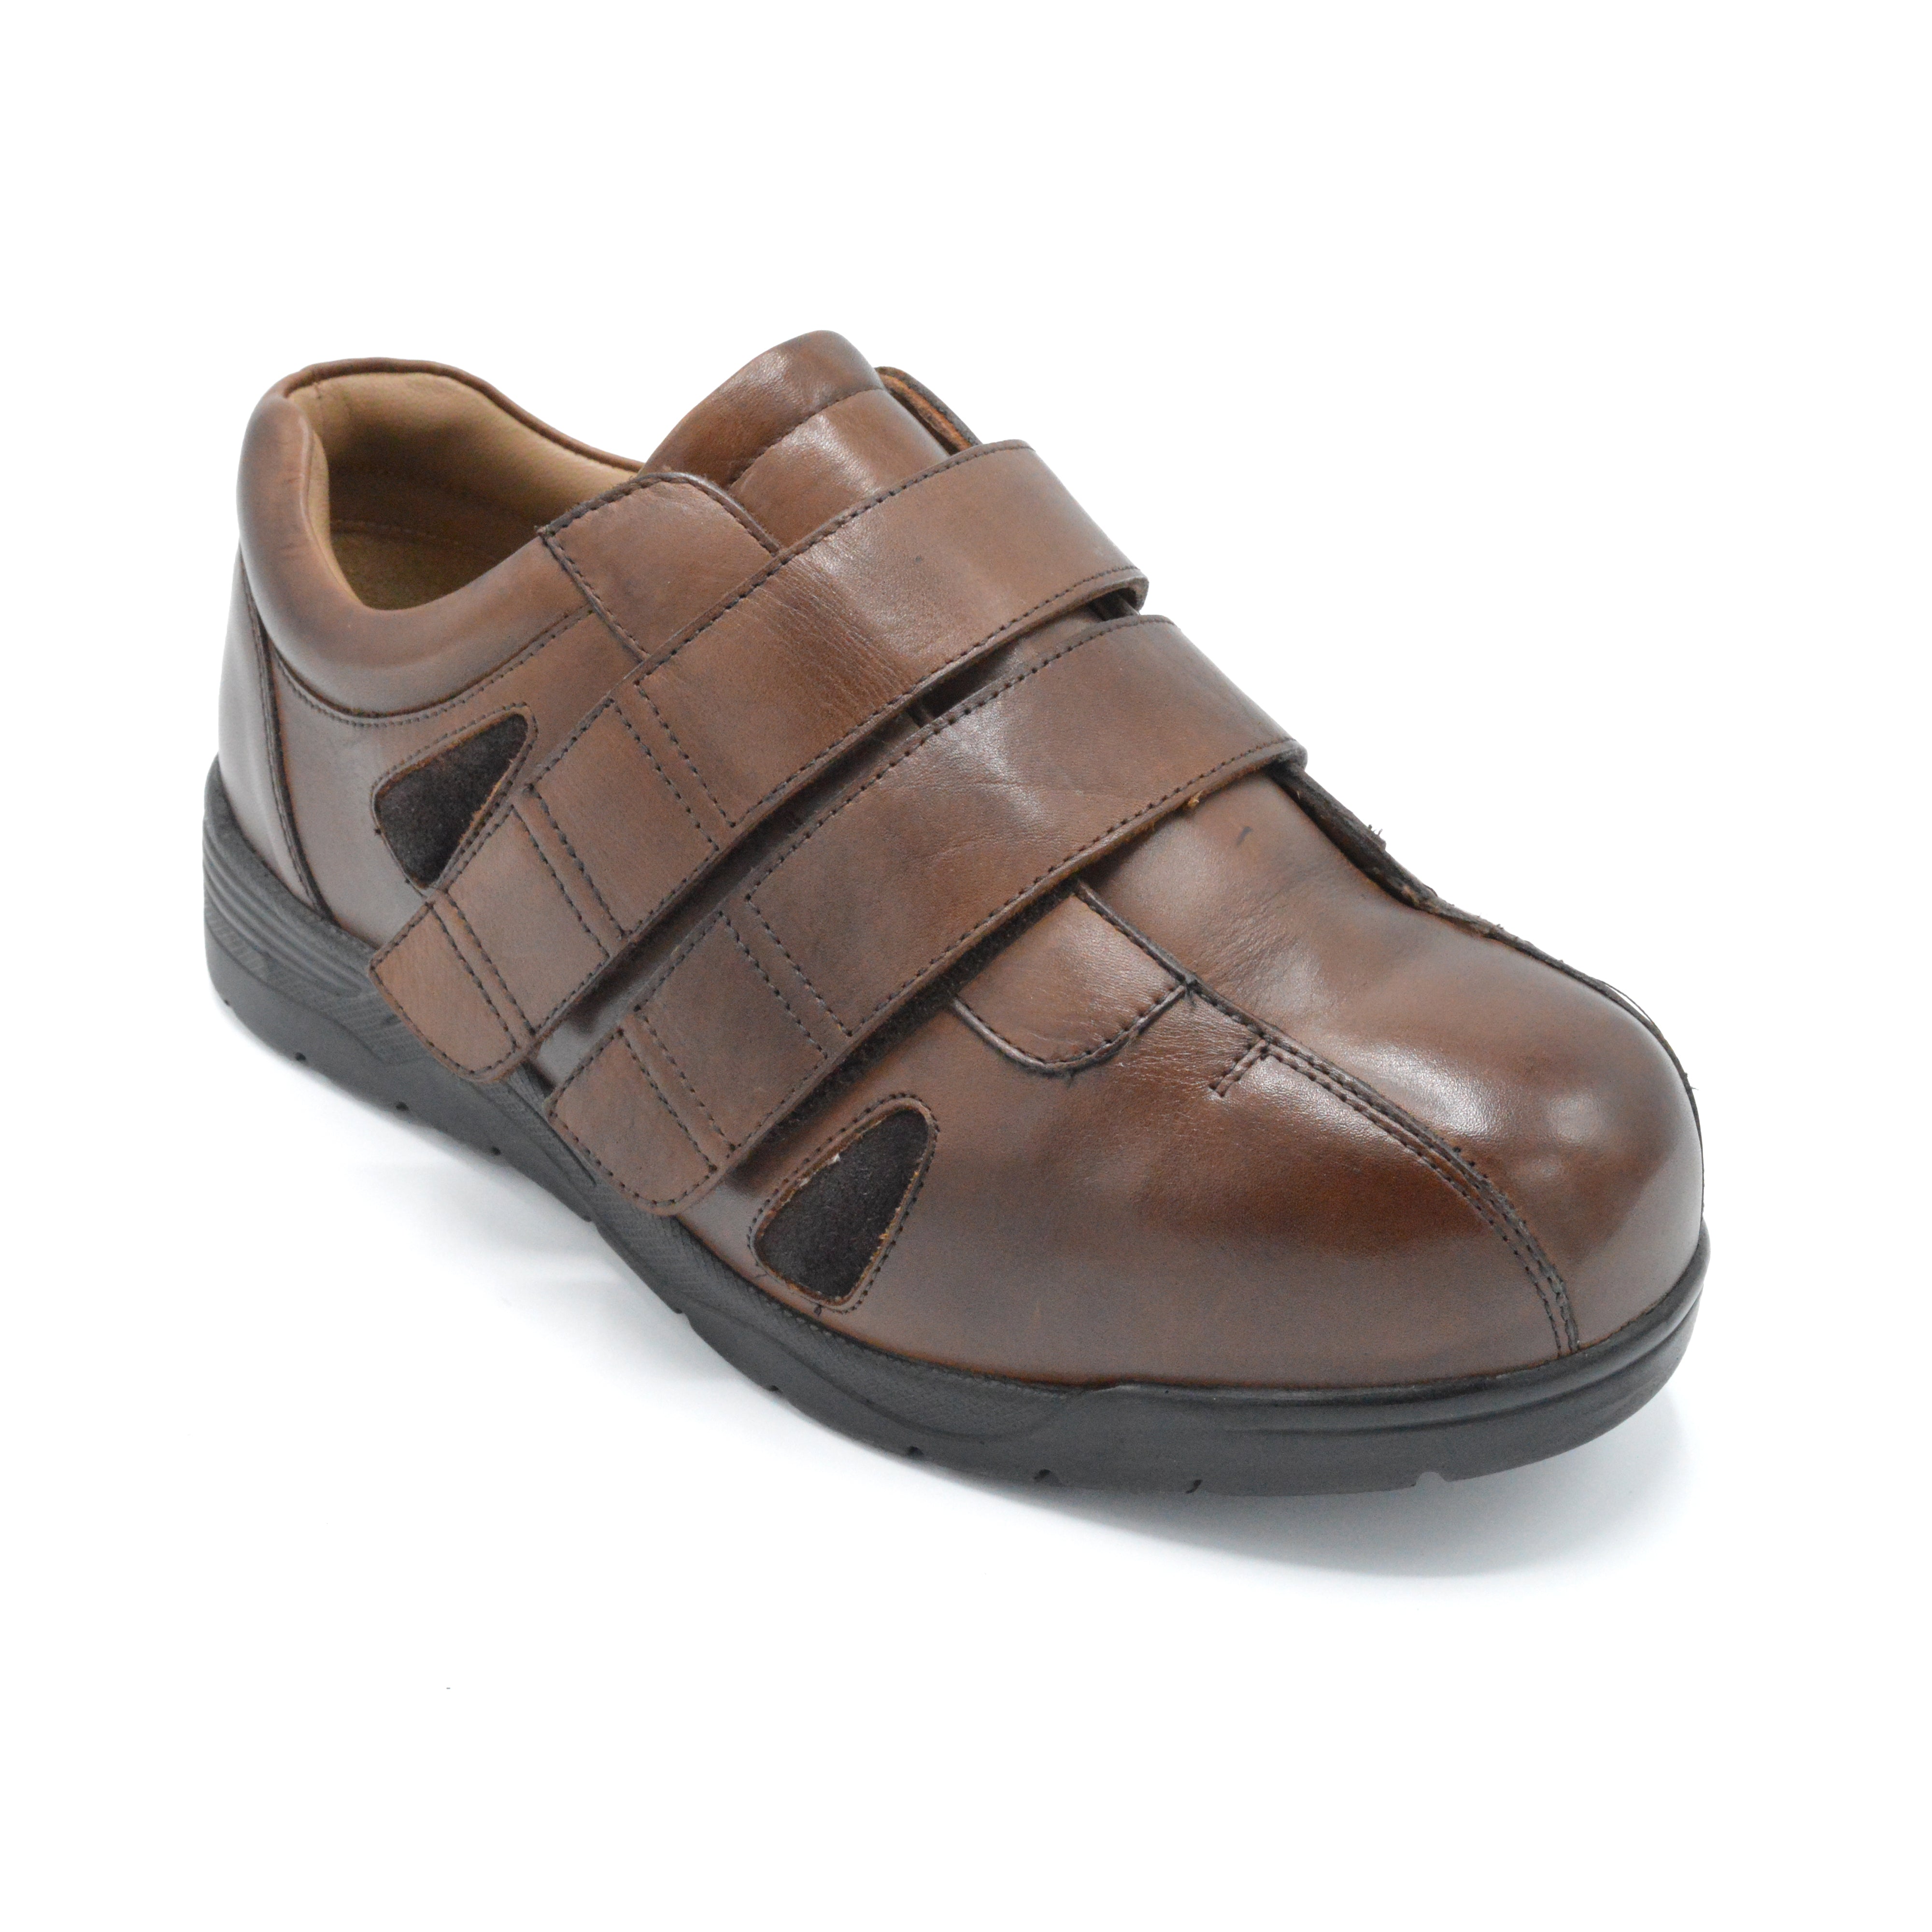 Mens Extra Wide Shoe For Bunions